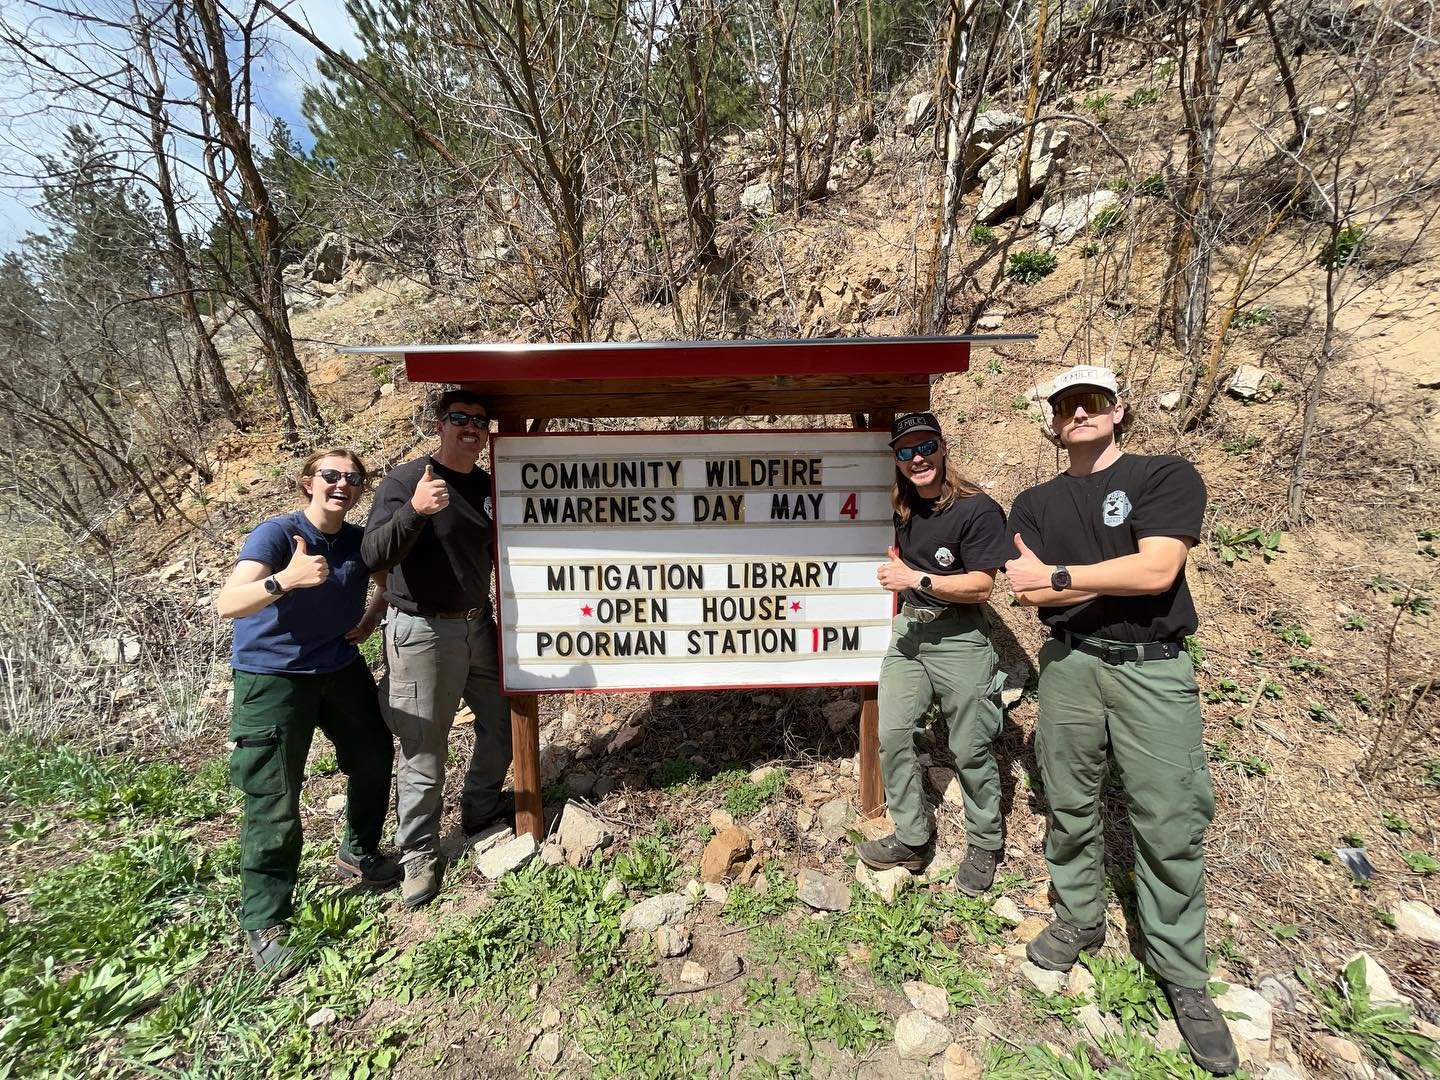 C'mon out to Poorman Station May 4th at 1pm to learn all about the Community Mitigation Tool Library! This wonderful resource is supported by Wildfire Partners and open to residents of Four Mile, Sunshine, Sugarloaf, and Gold Hill Fire Protection Dis